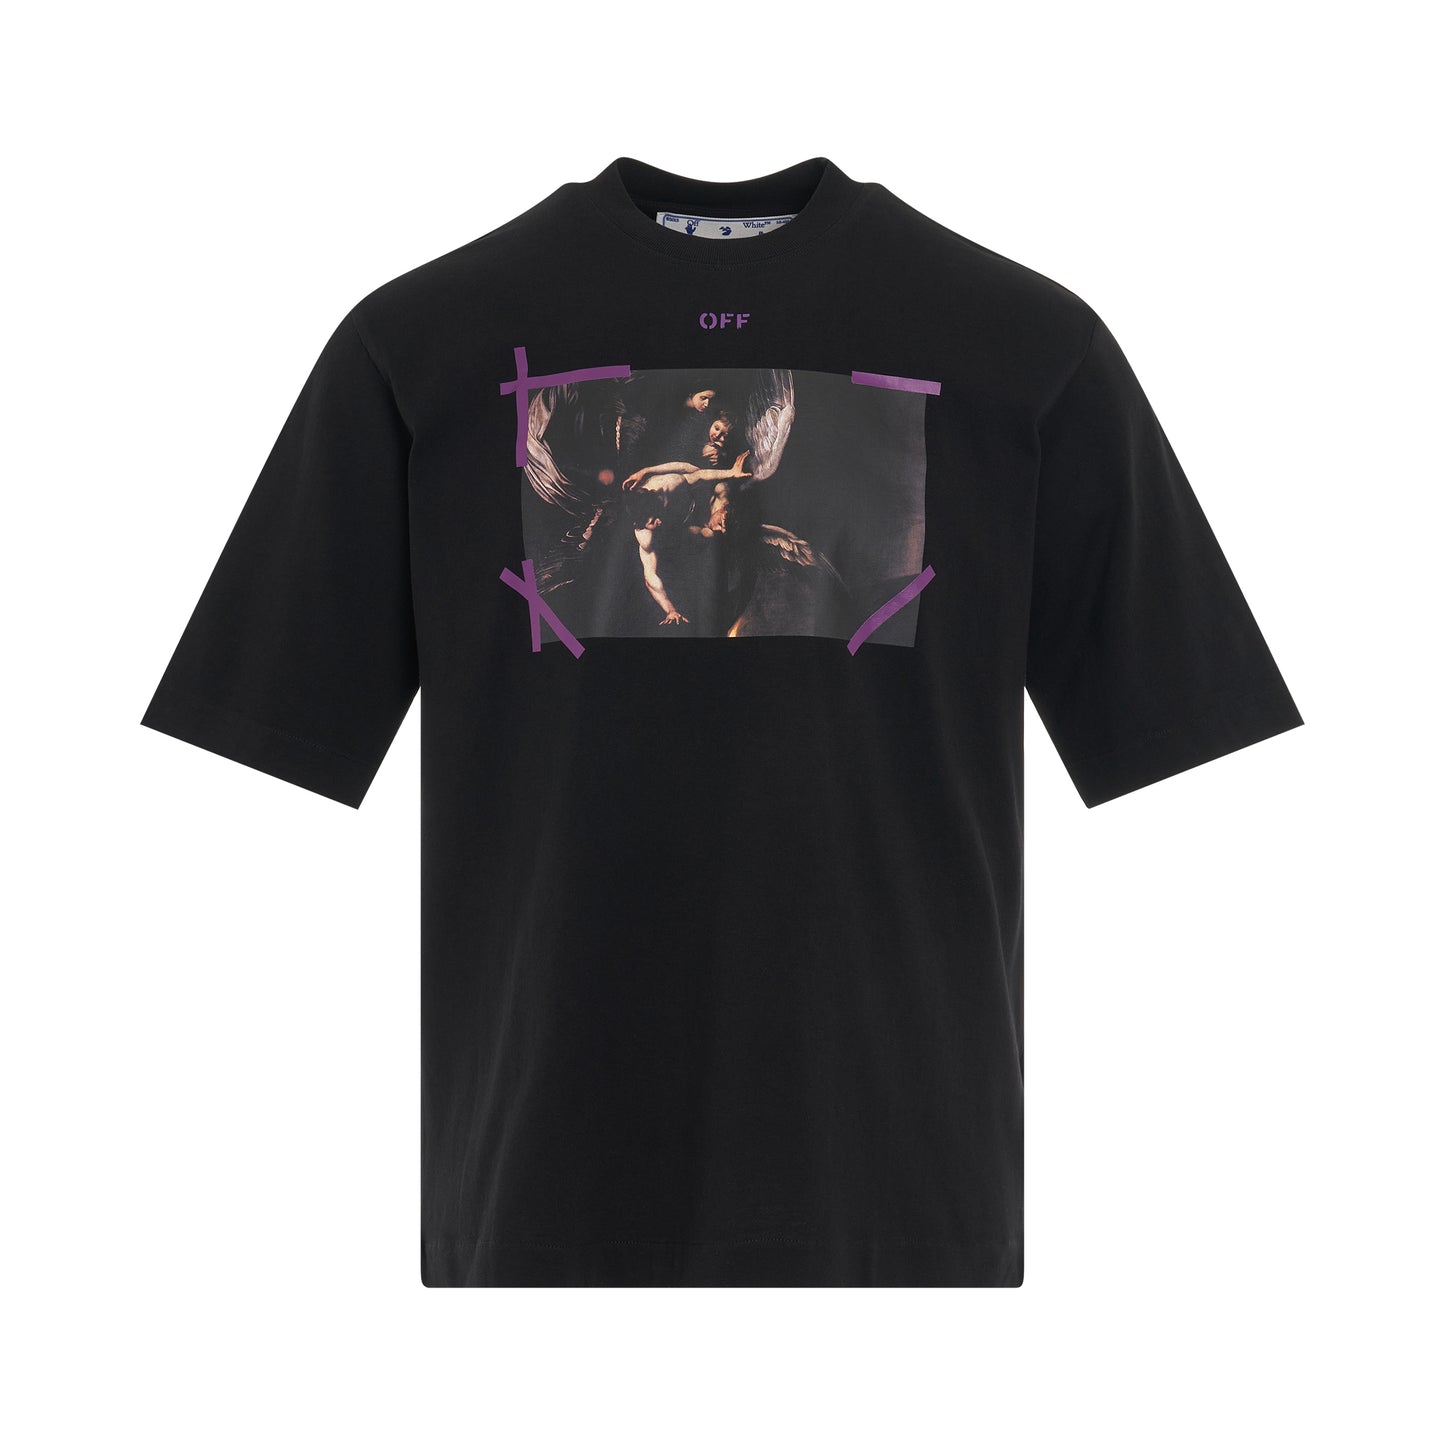 Caravaggio Arrow Mercy Skate T-Shirt in Black/Orchid